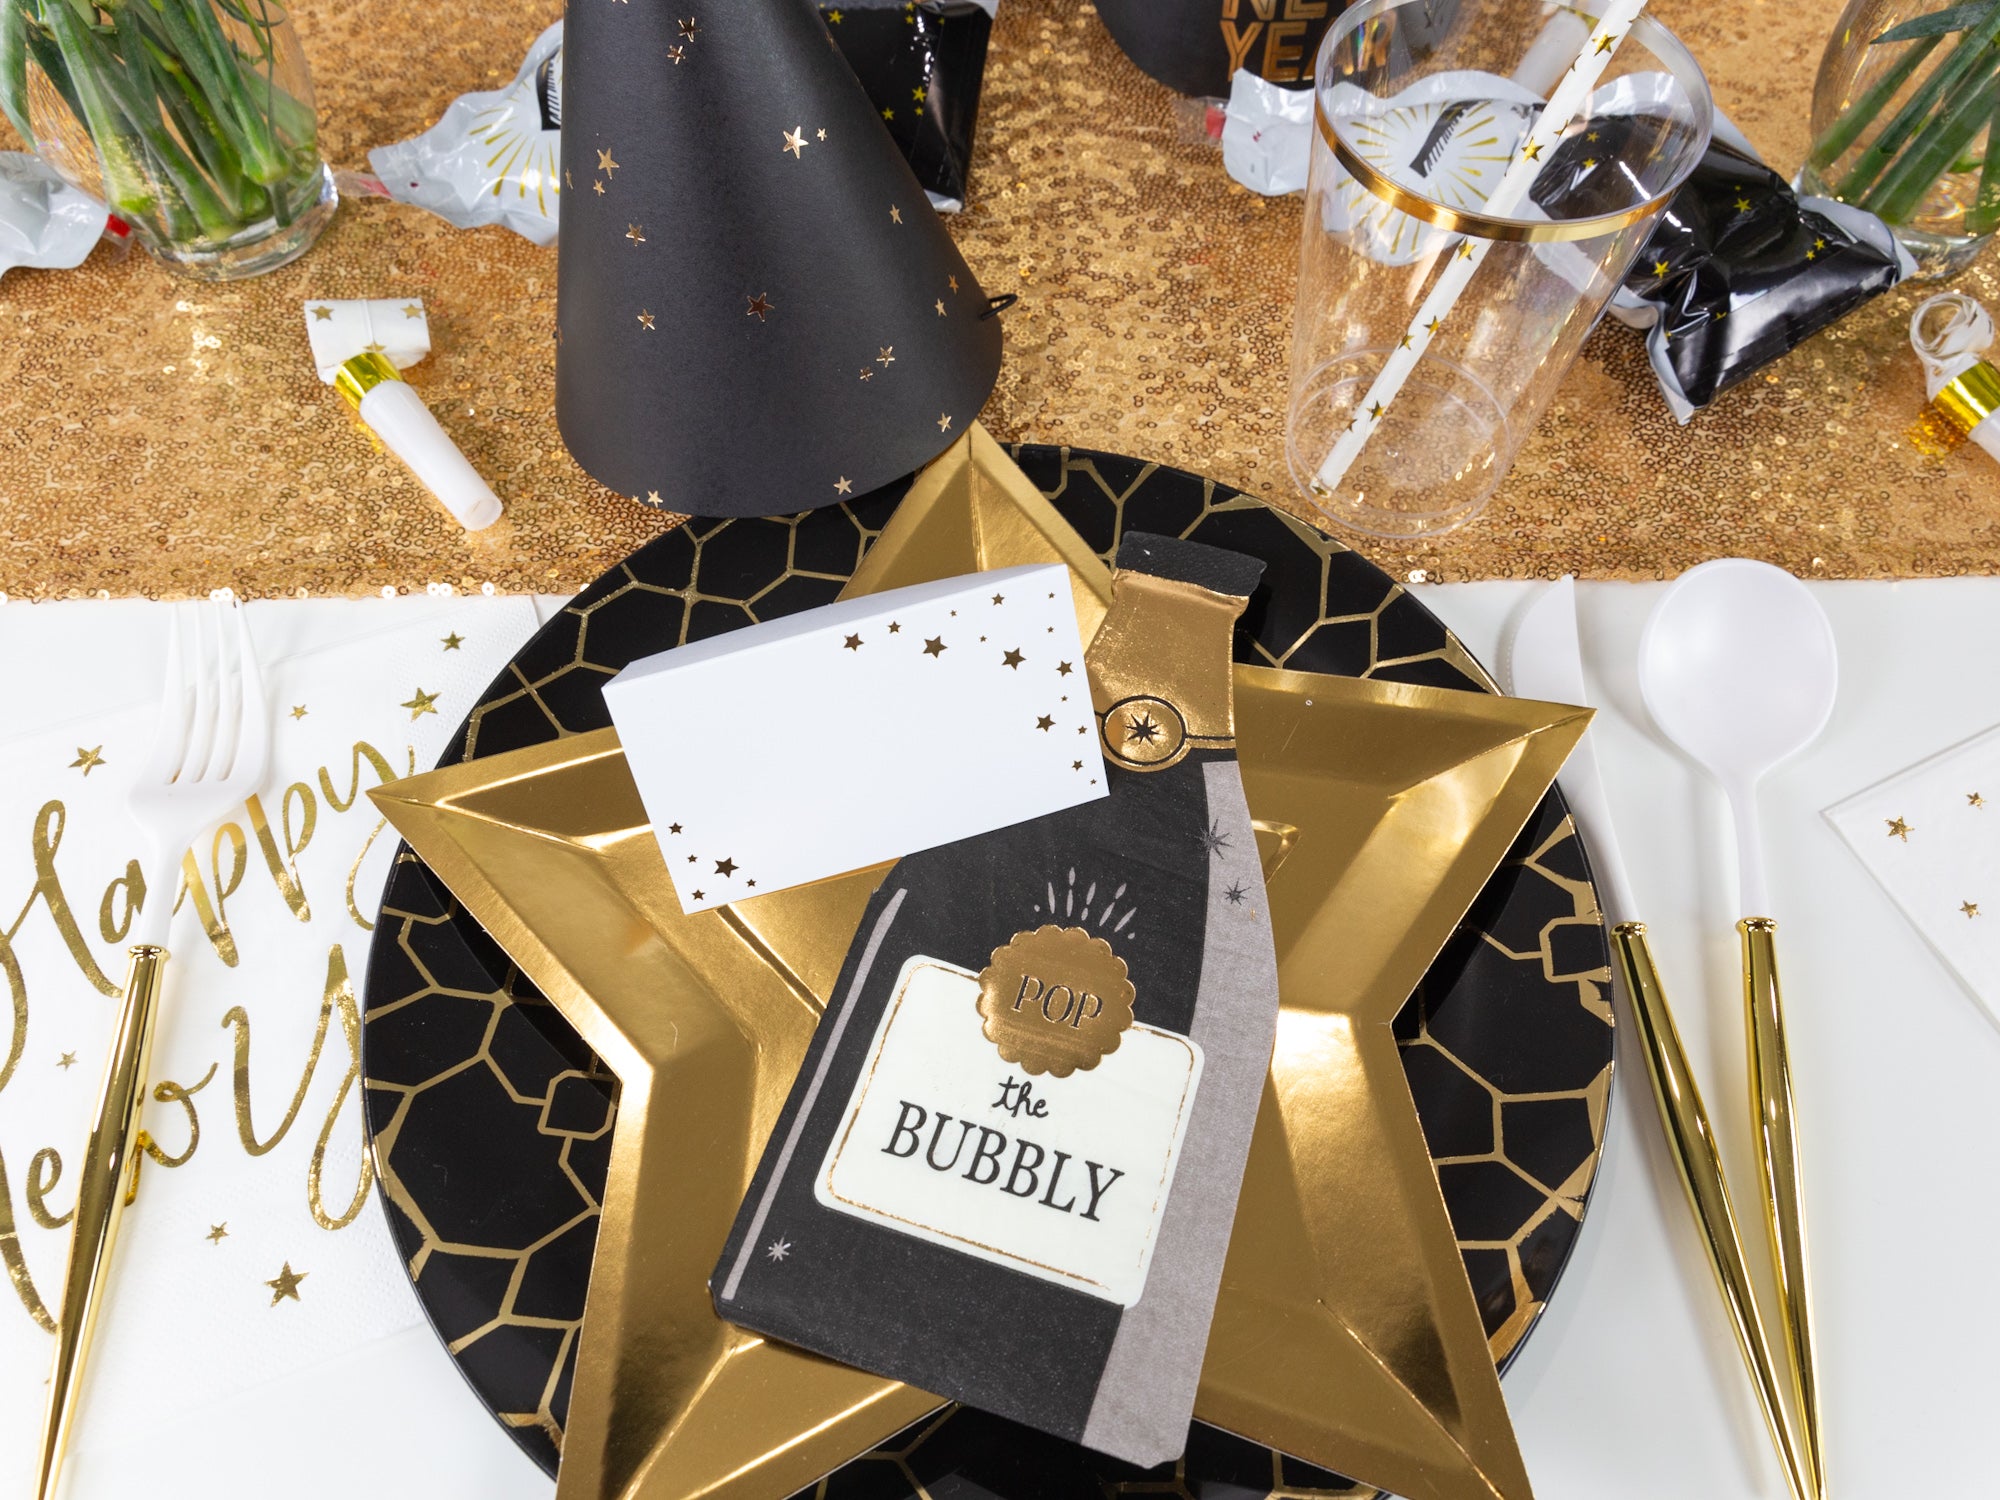 Pop the Bubbly Bottle Lunch Napkins 18ct | The Party Darling